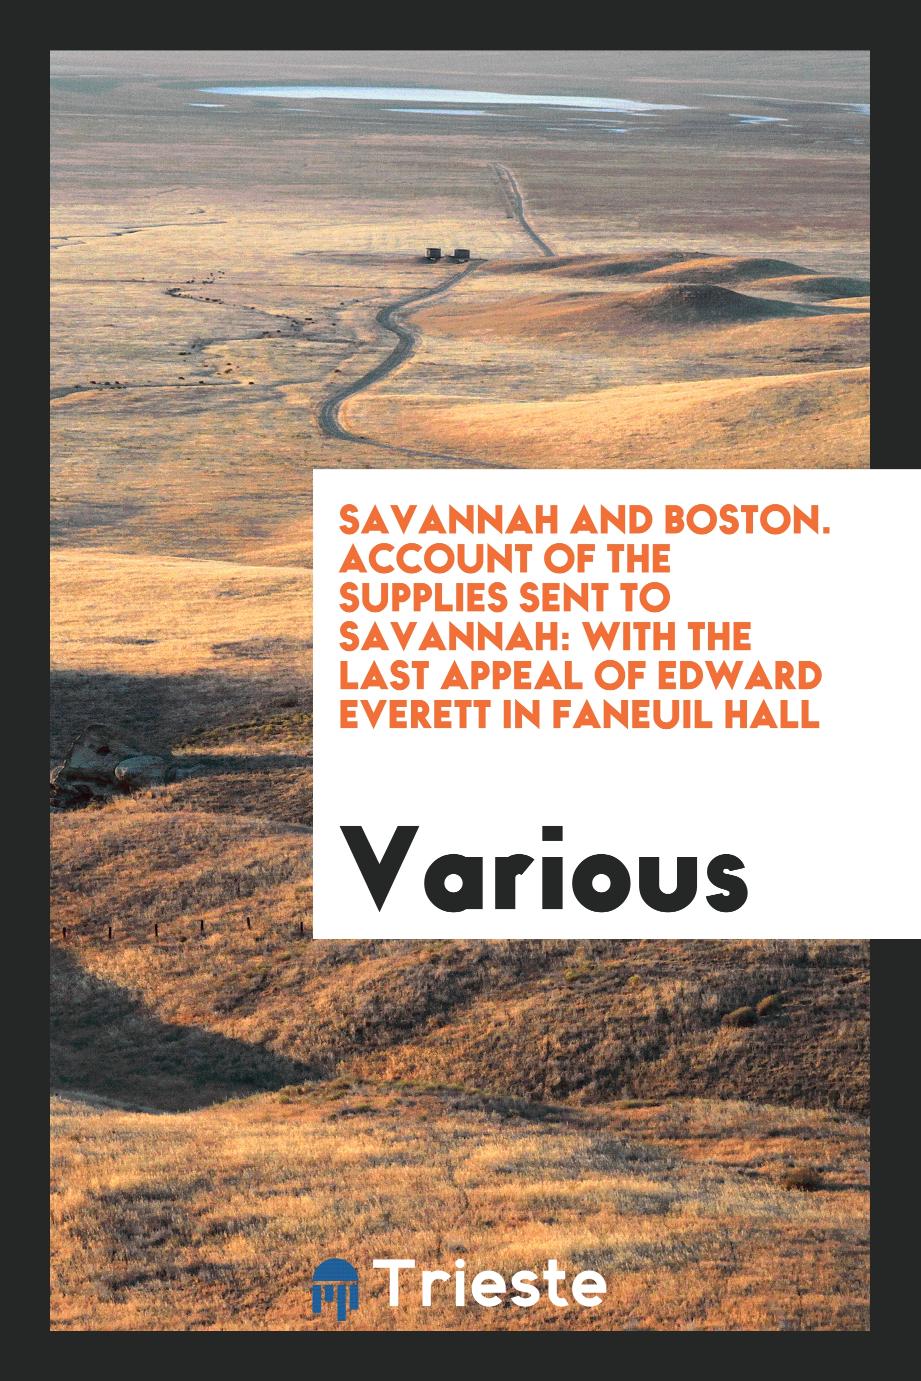 Savannah and Boston. Account of the supplies sent to Savannah: with the last appeal of Edward Everett in Faneuil hall